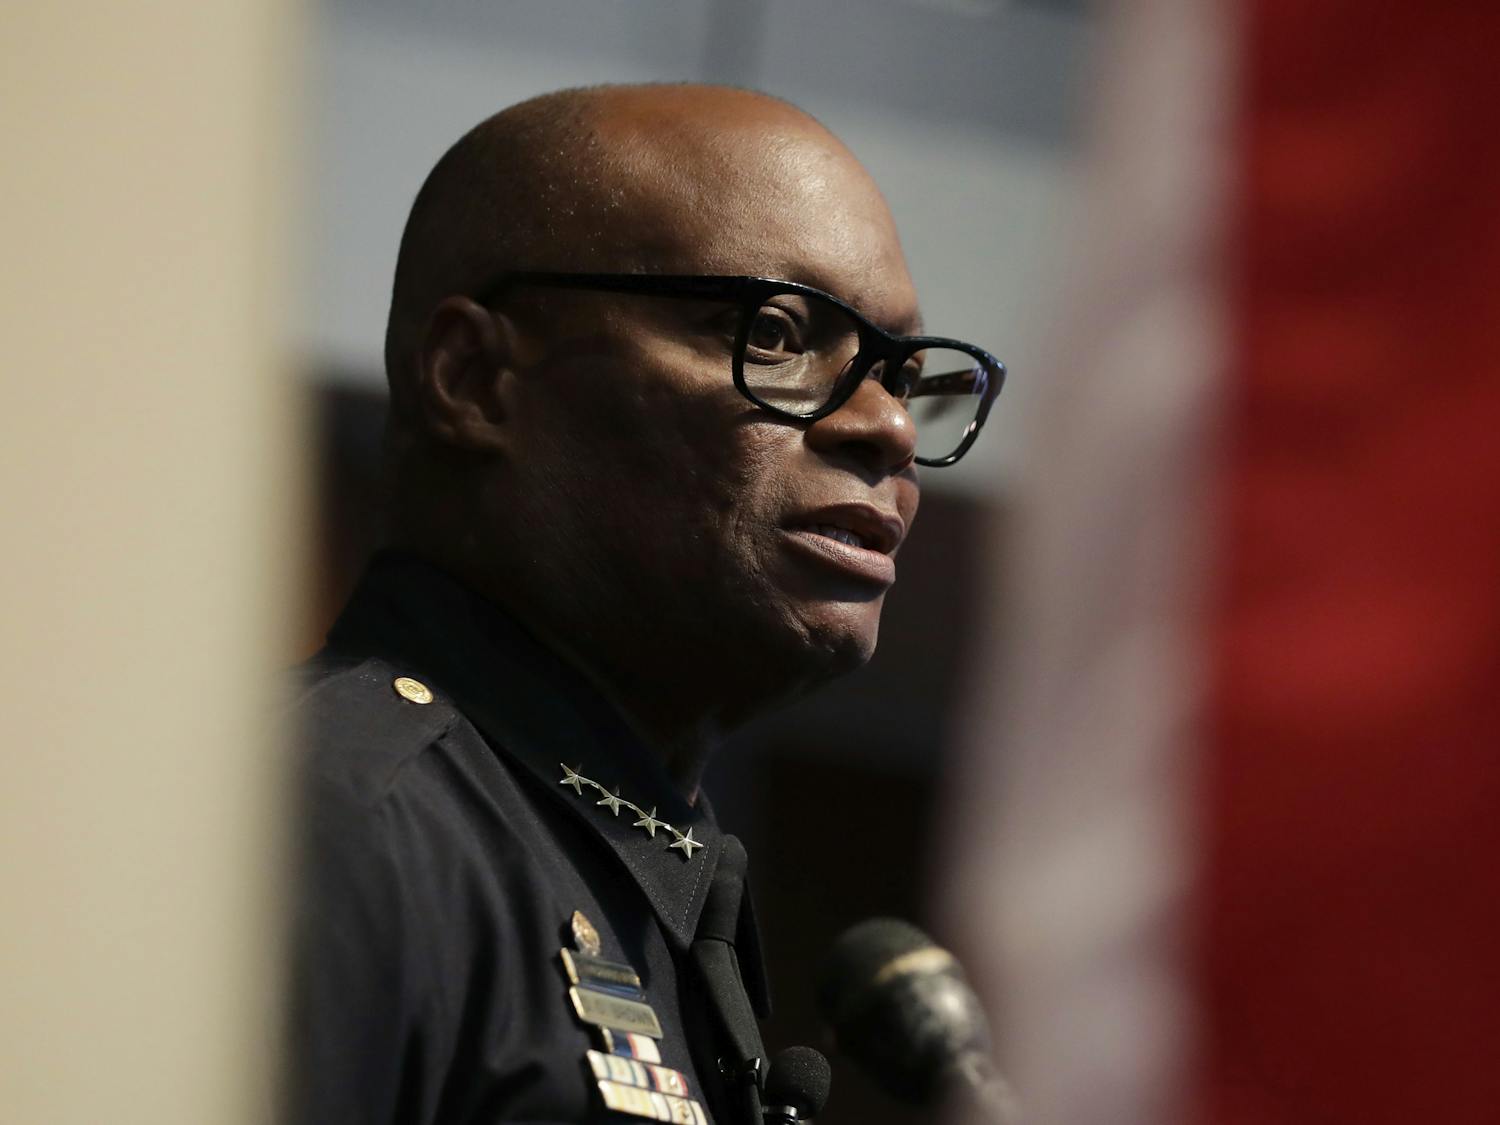 Dallas Police Chief David Brown answers questions during a news conference, Monday, July 11, 2016, in Dallas. Five police officers were killed and several injured during a shooting in downtown Dallas last week. (AP Photo/Eric Gay)